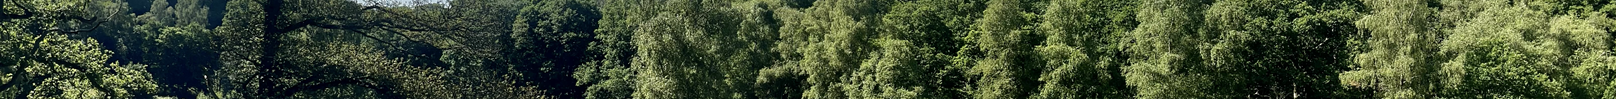 panoramic view of nature reserve looking out from high above on a rock top towards mature trees and open green space on a bright sunny day 